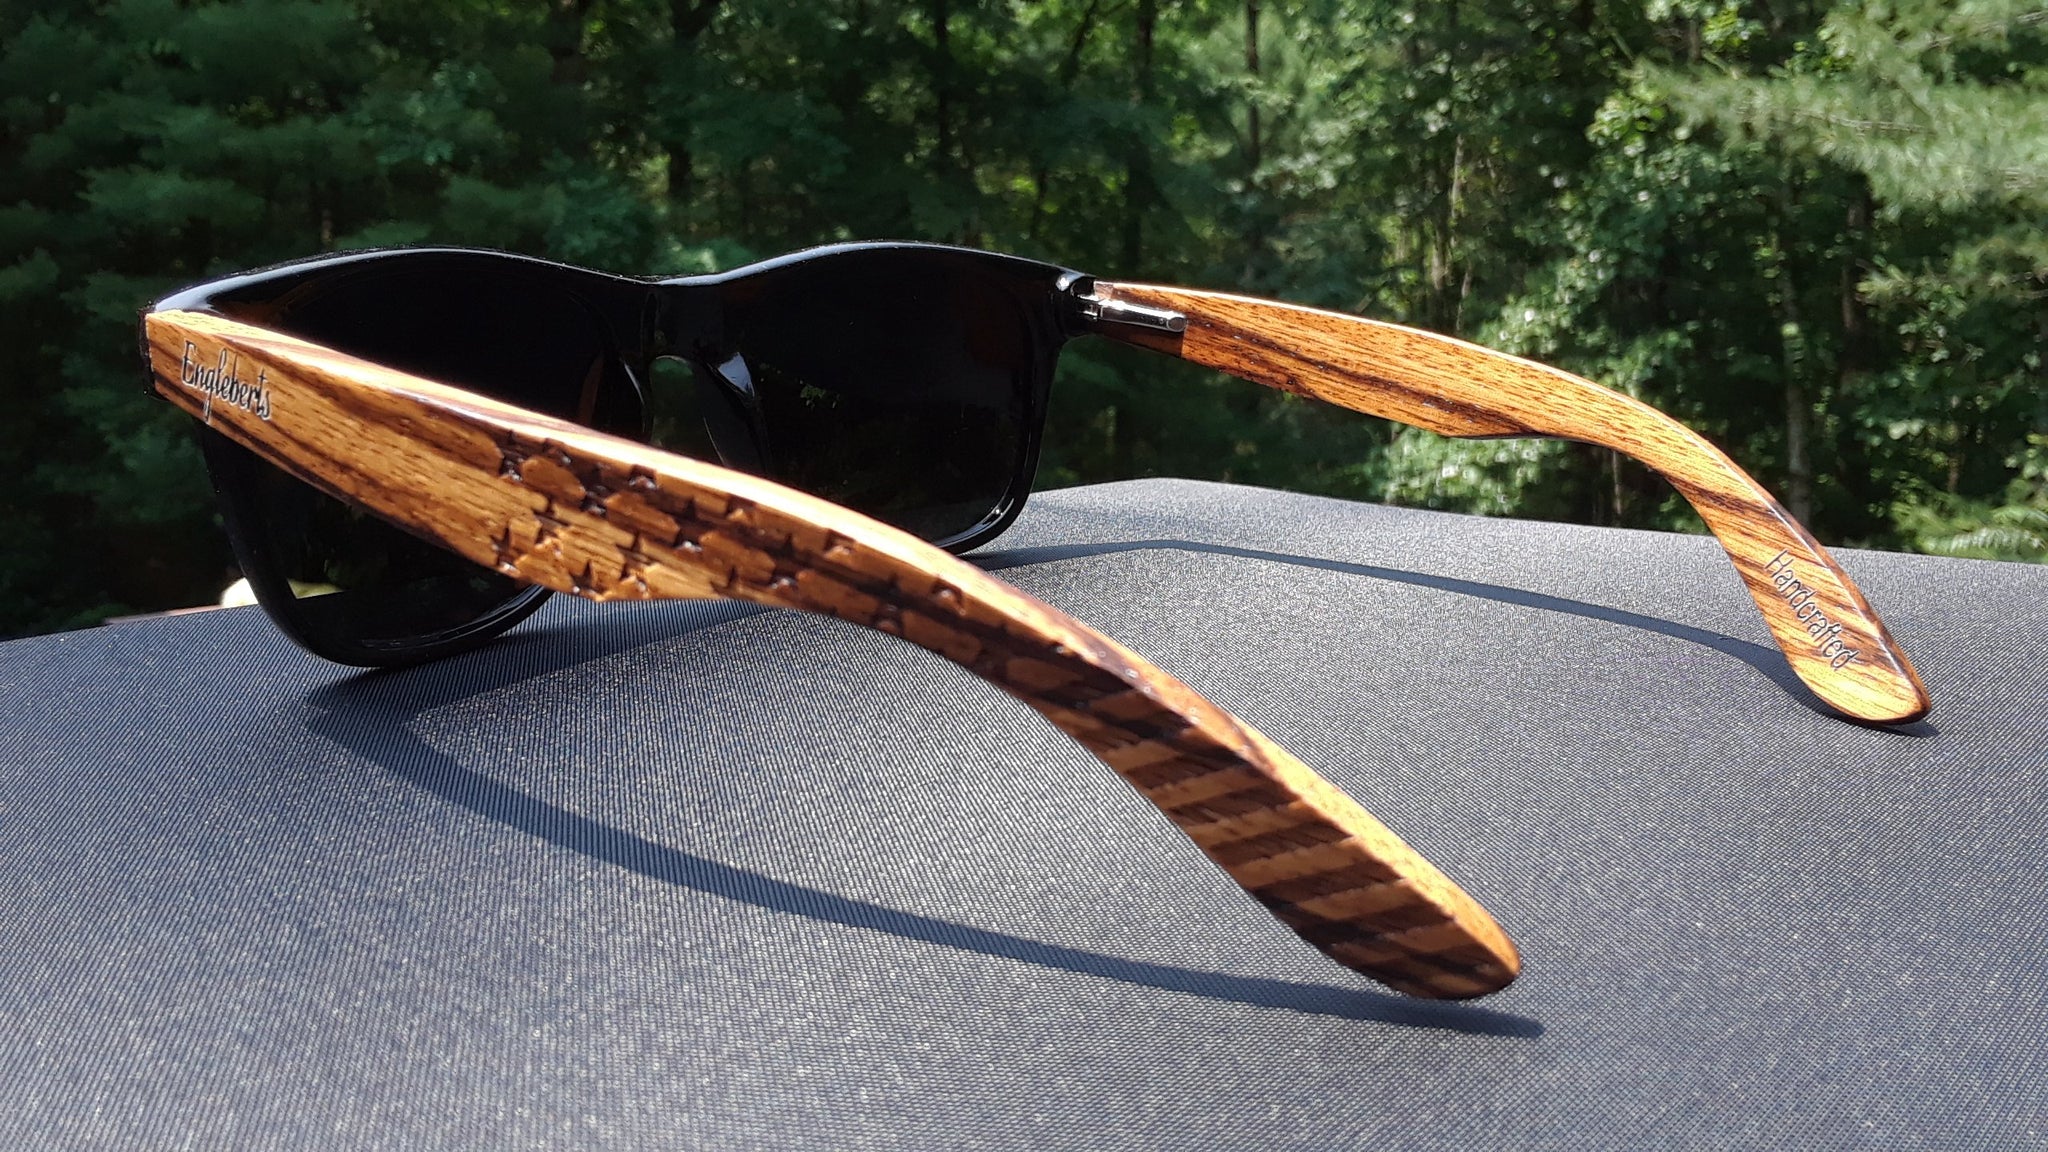 Zebrawood Sunglasses, Stars and Bars With Wooden Case, Polarized,